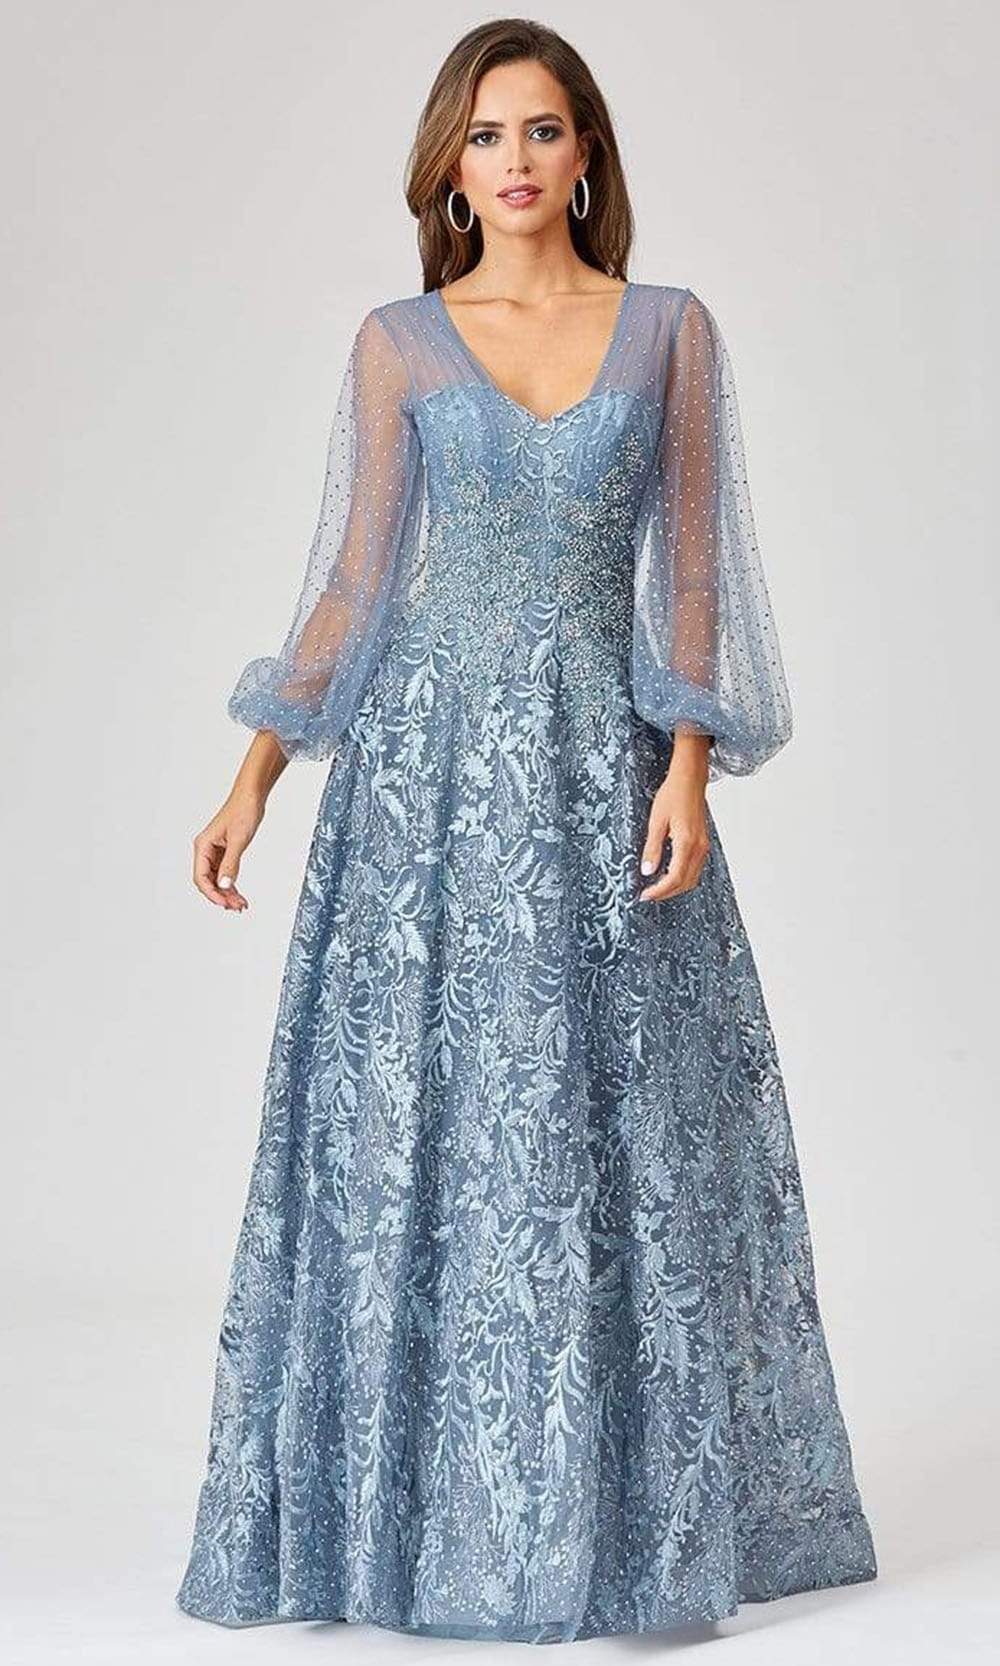 Lara Dresses - 29455 Embroidered Sheer Long Sleeve A-Line Gown Mother of the Bride Dresses 0 / Slate